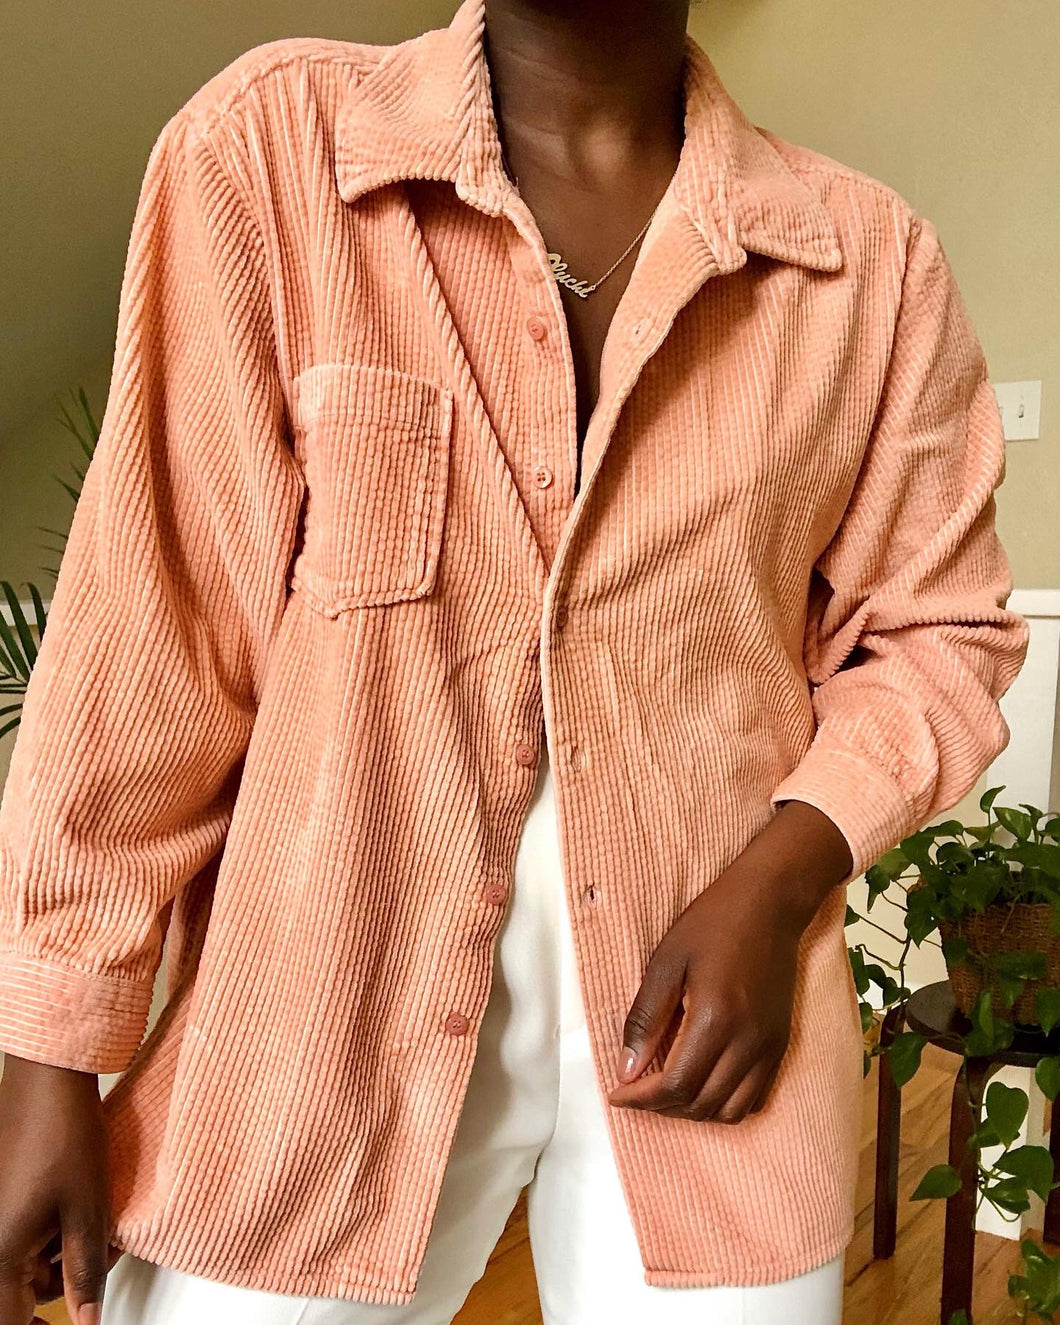 peach wide wale corduroy button up